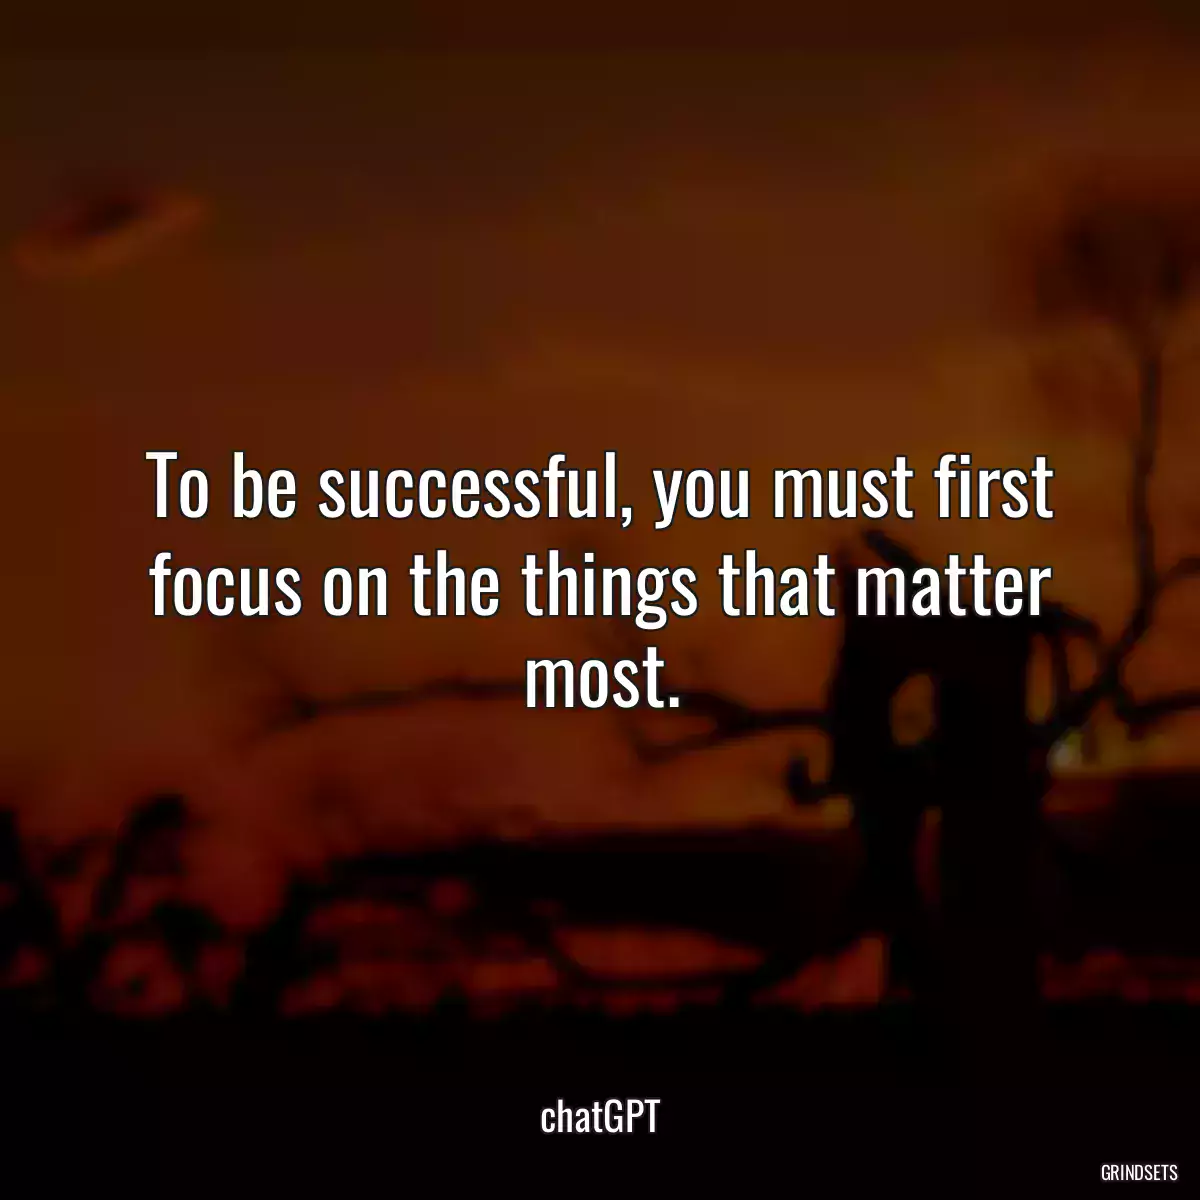 To be successful, you must first focus on the things that matter most.